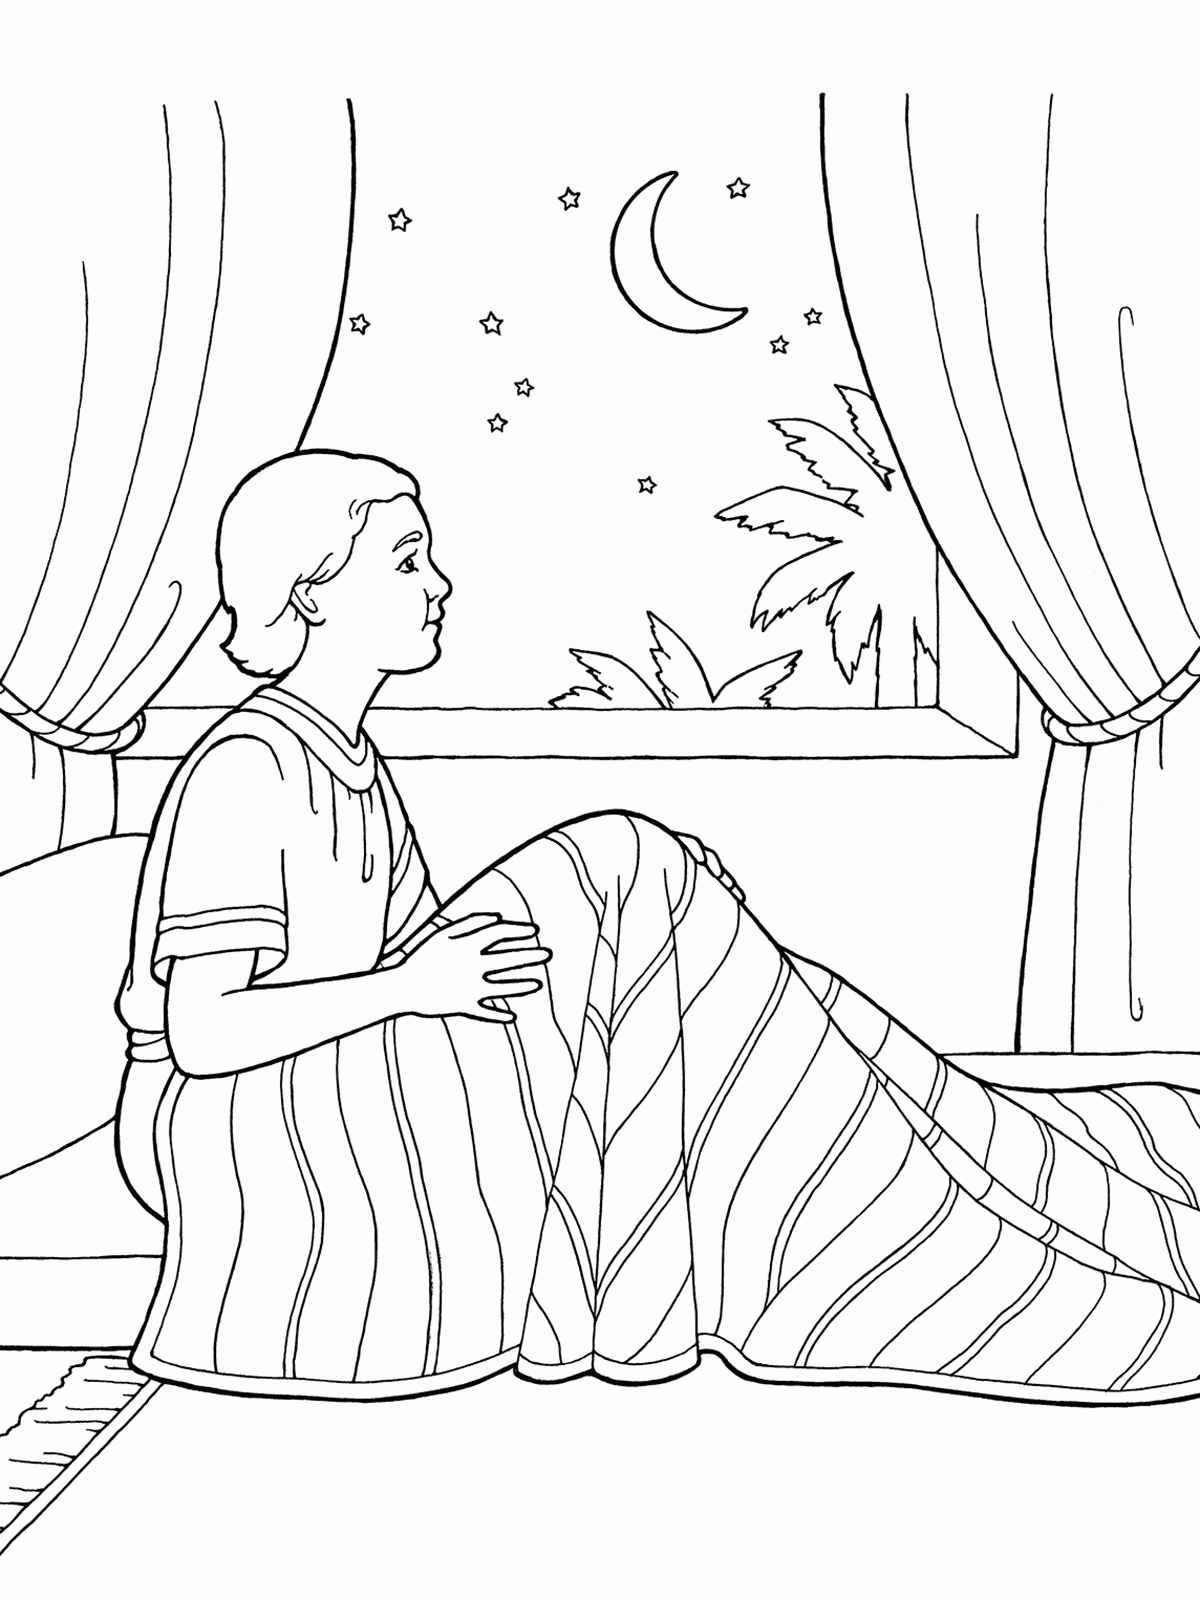 10 Pics of Prophet Samuel Coloring Page - The Lord Calls Samuel ...